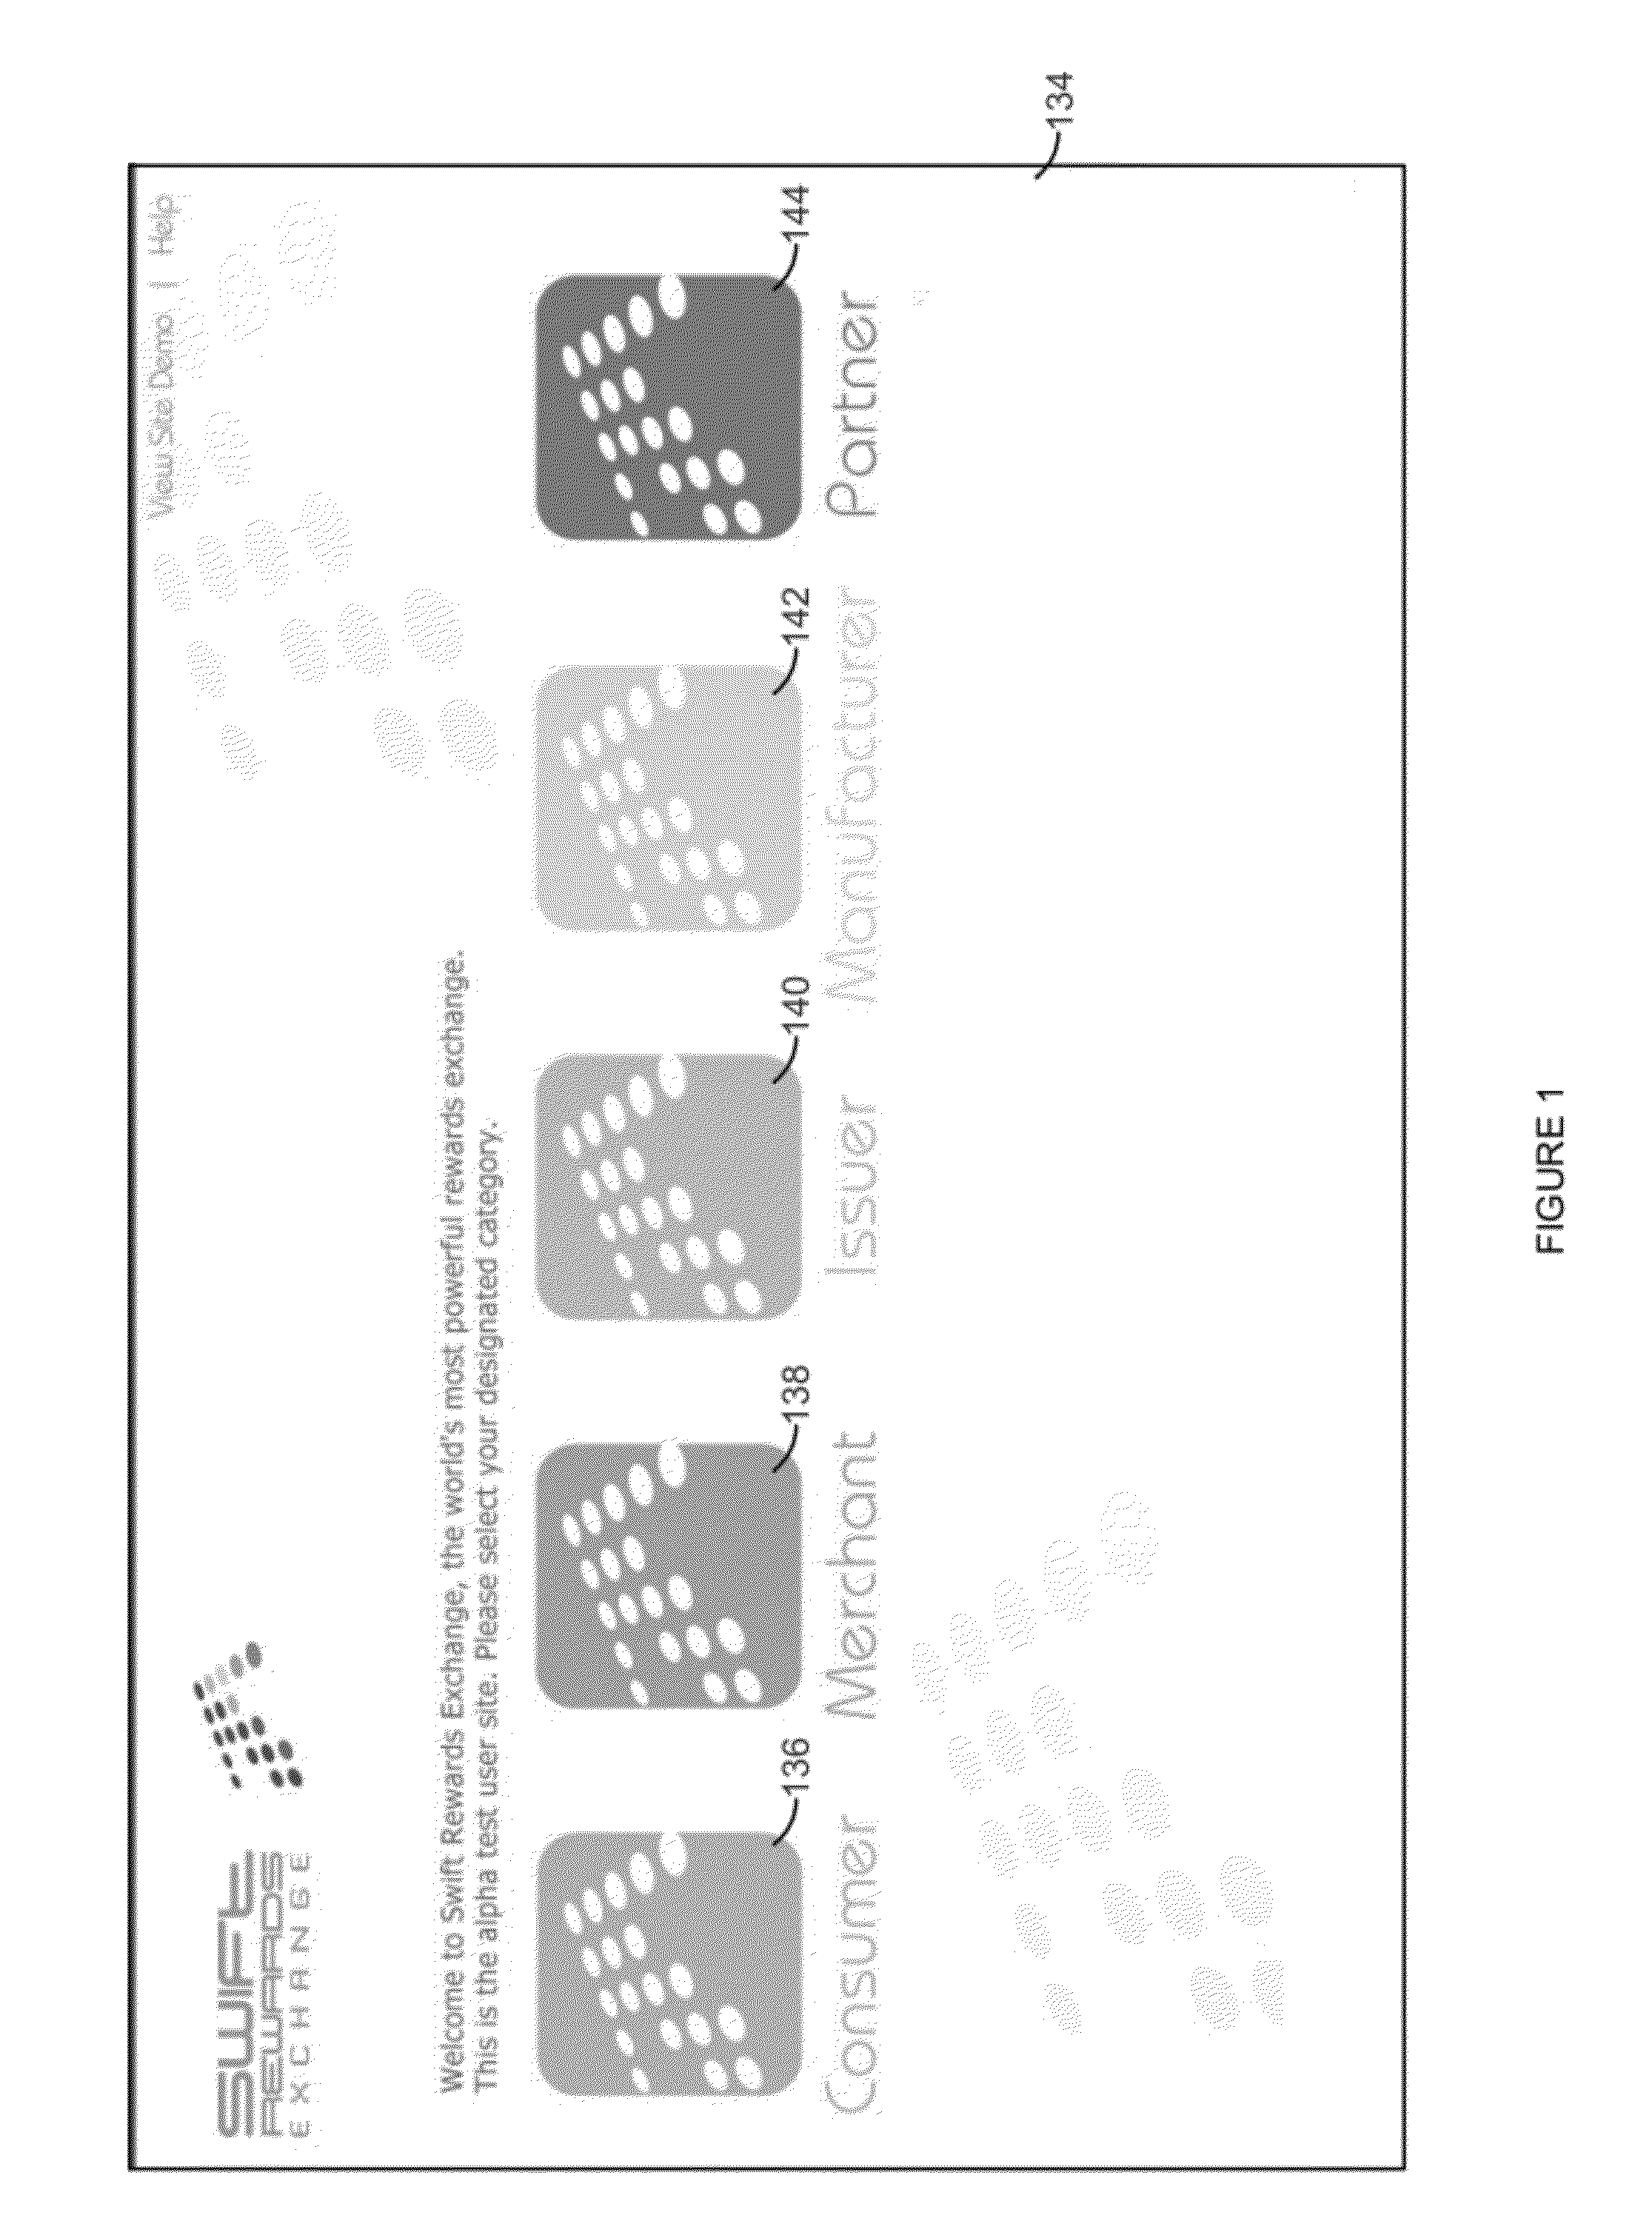 Reward exchange method and system for executing a trading agreement between merchants and issuers